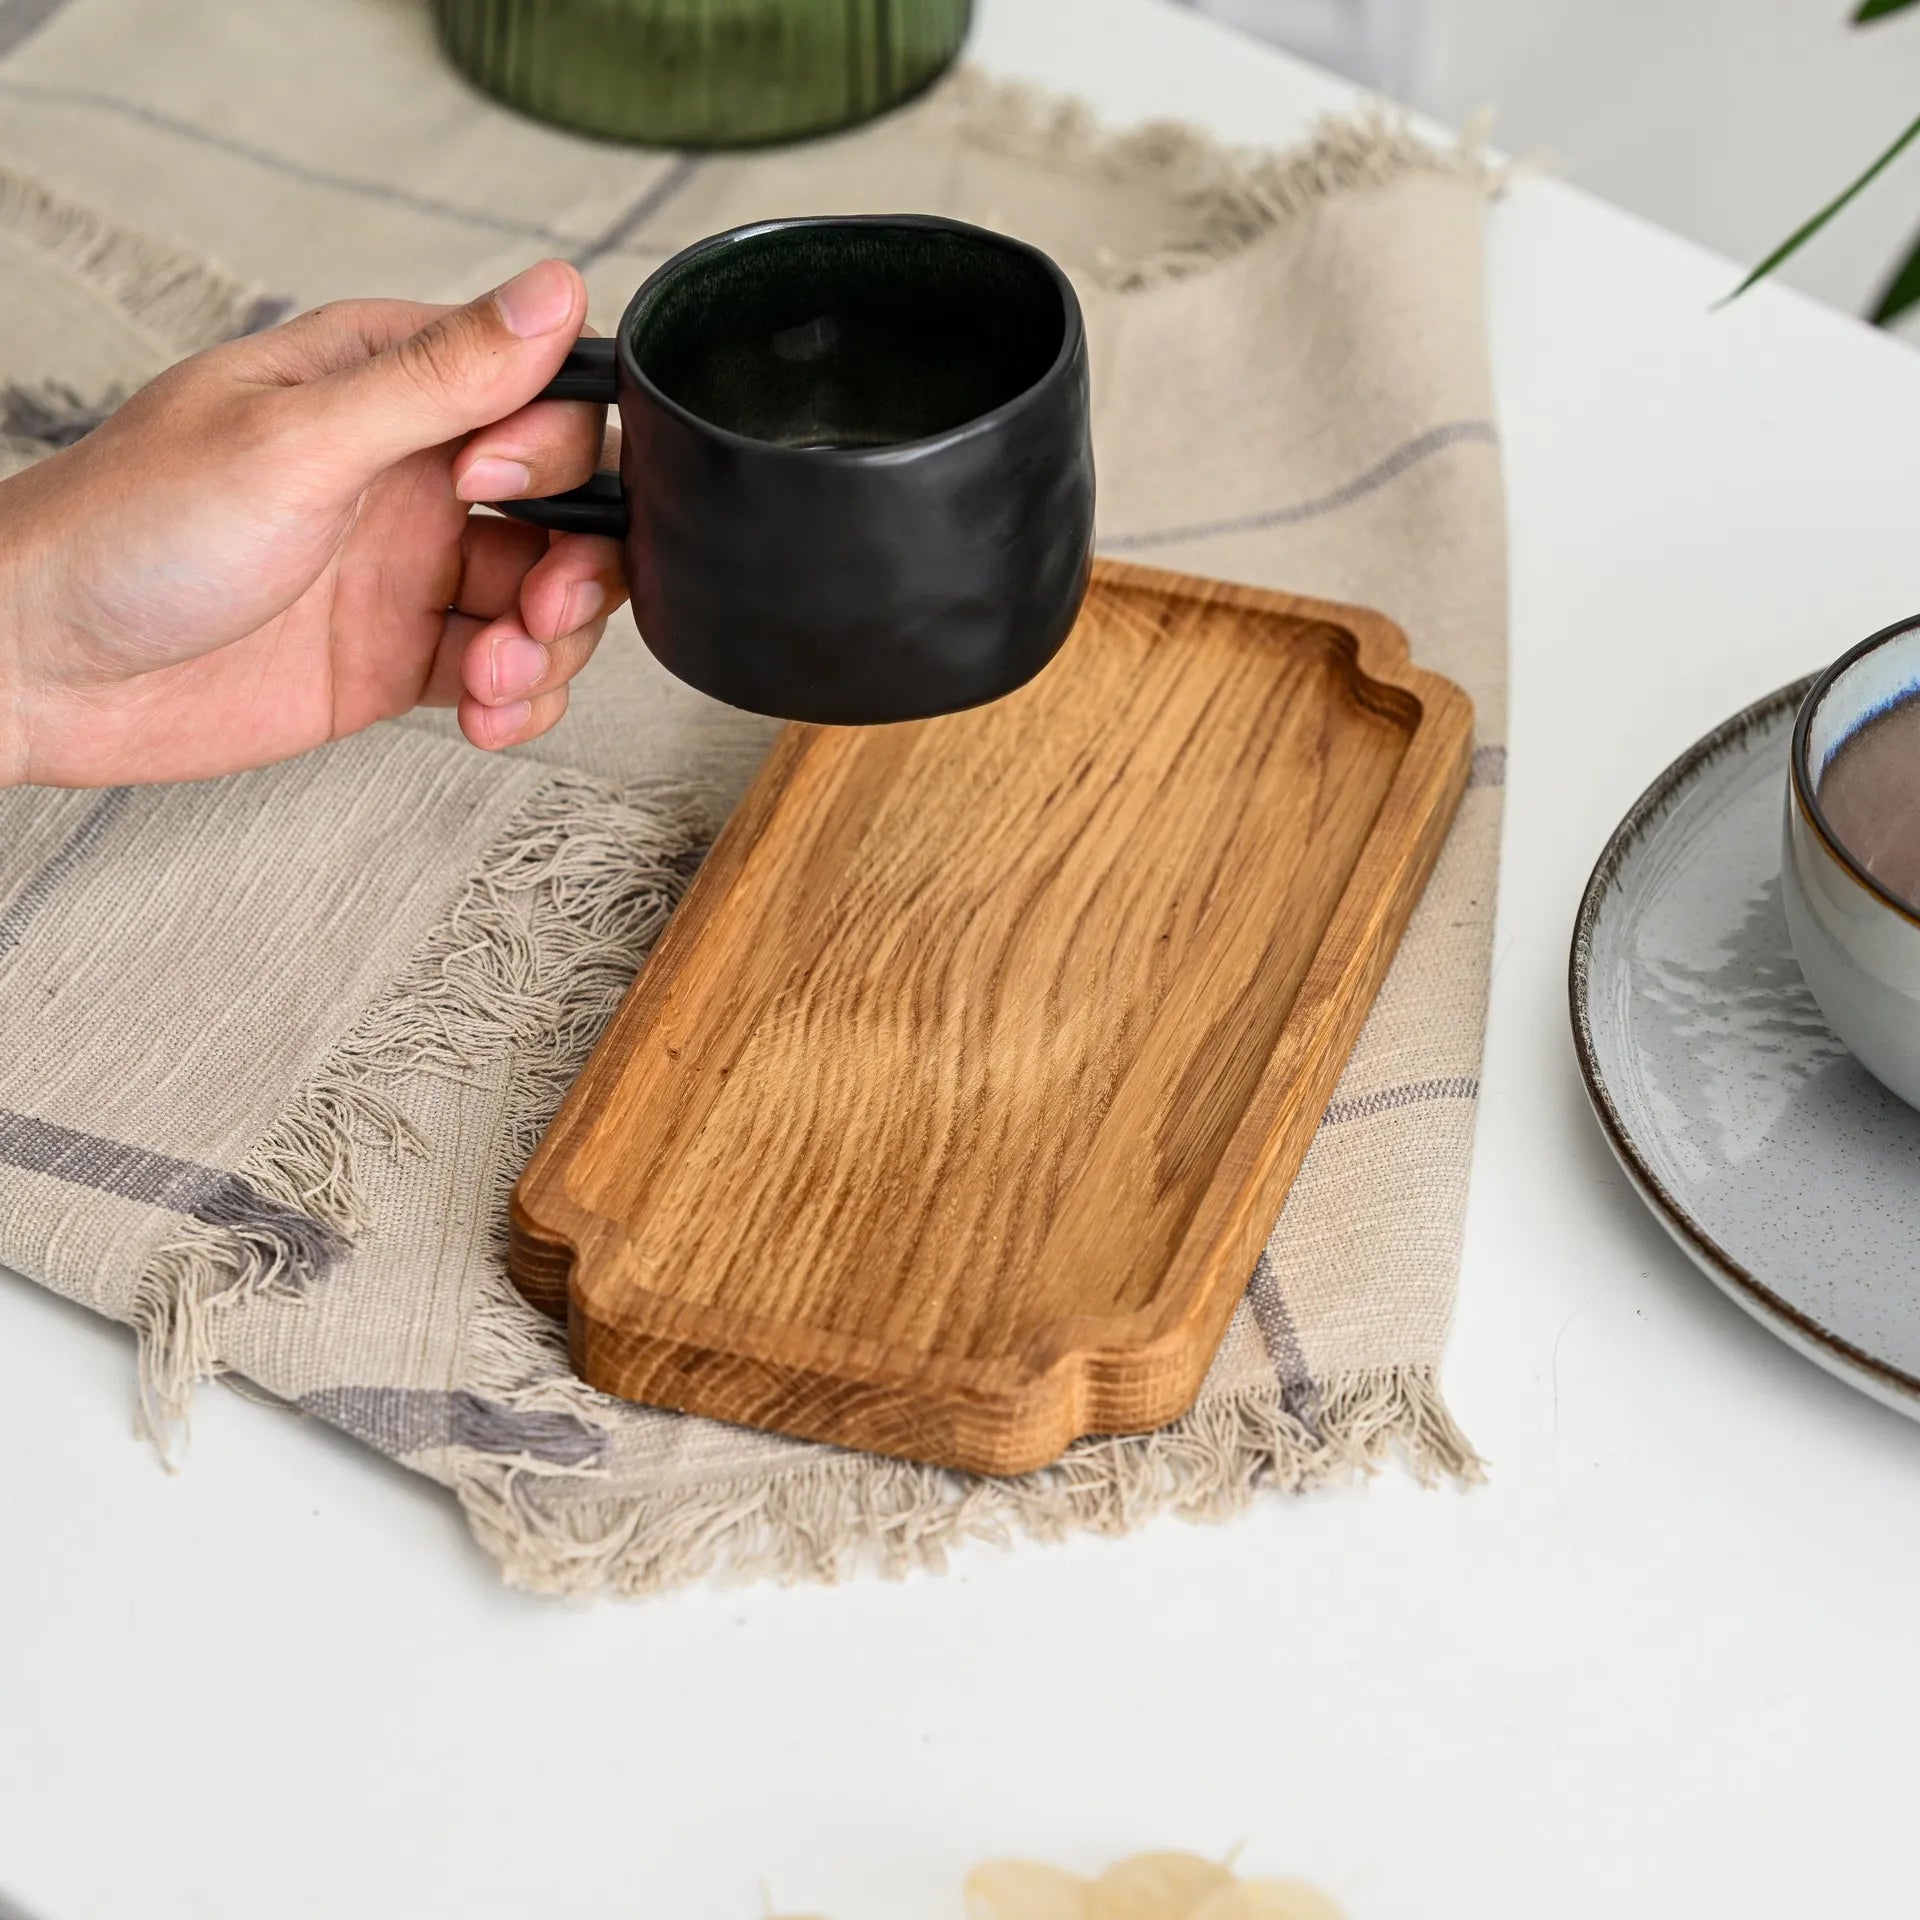 Rustic wood coffee table tray, personalized for hotels, perfect for serving morning coffee or evening snacks.